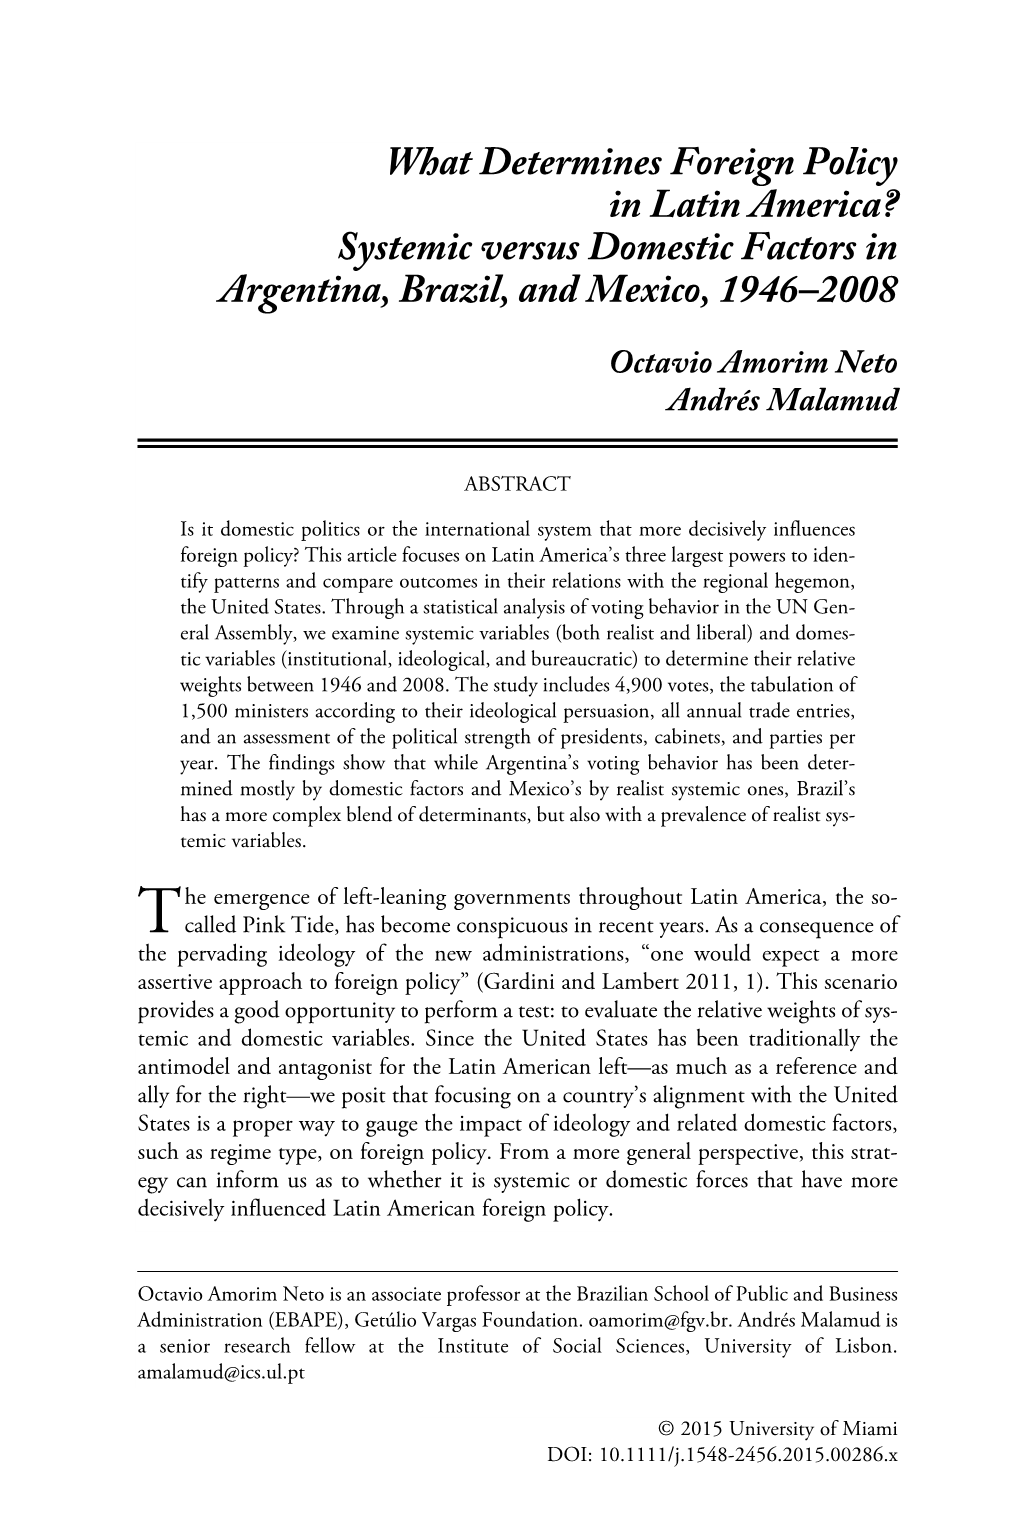 What Determines Foreign Policy in Latin America? Systemic Versus Domestic Factors in Argentina, Brazil, and Mexico, 1946&#X0